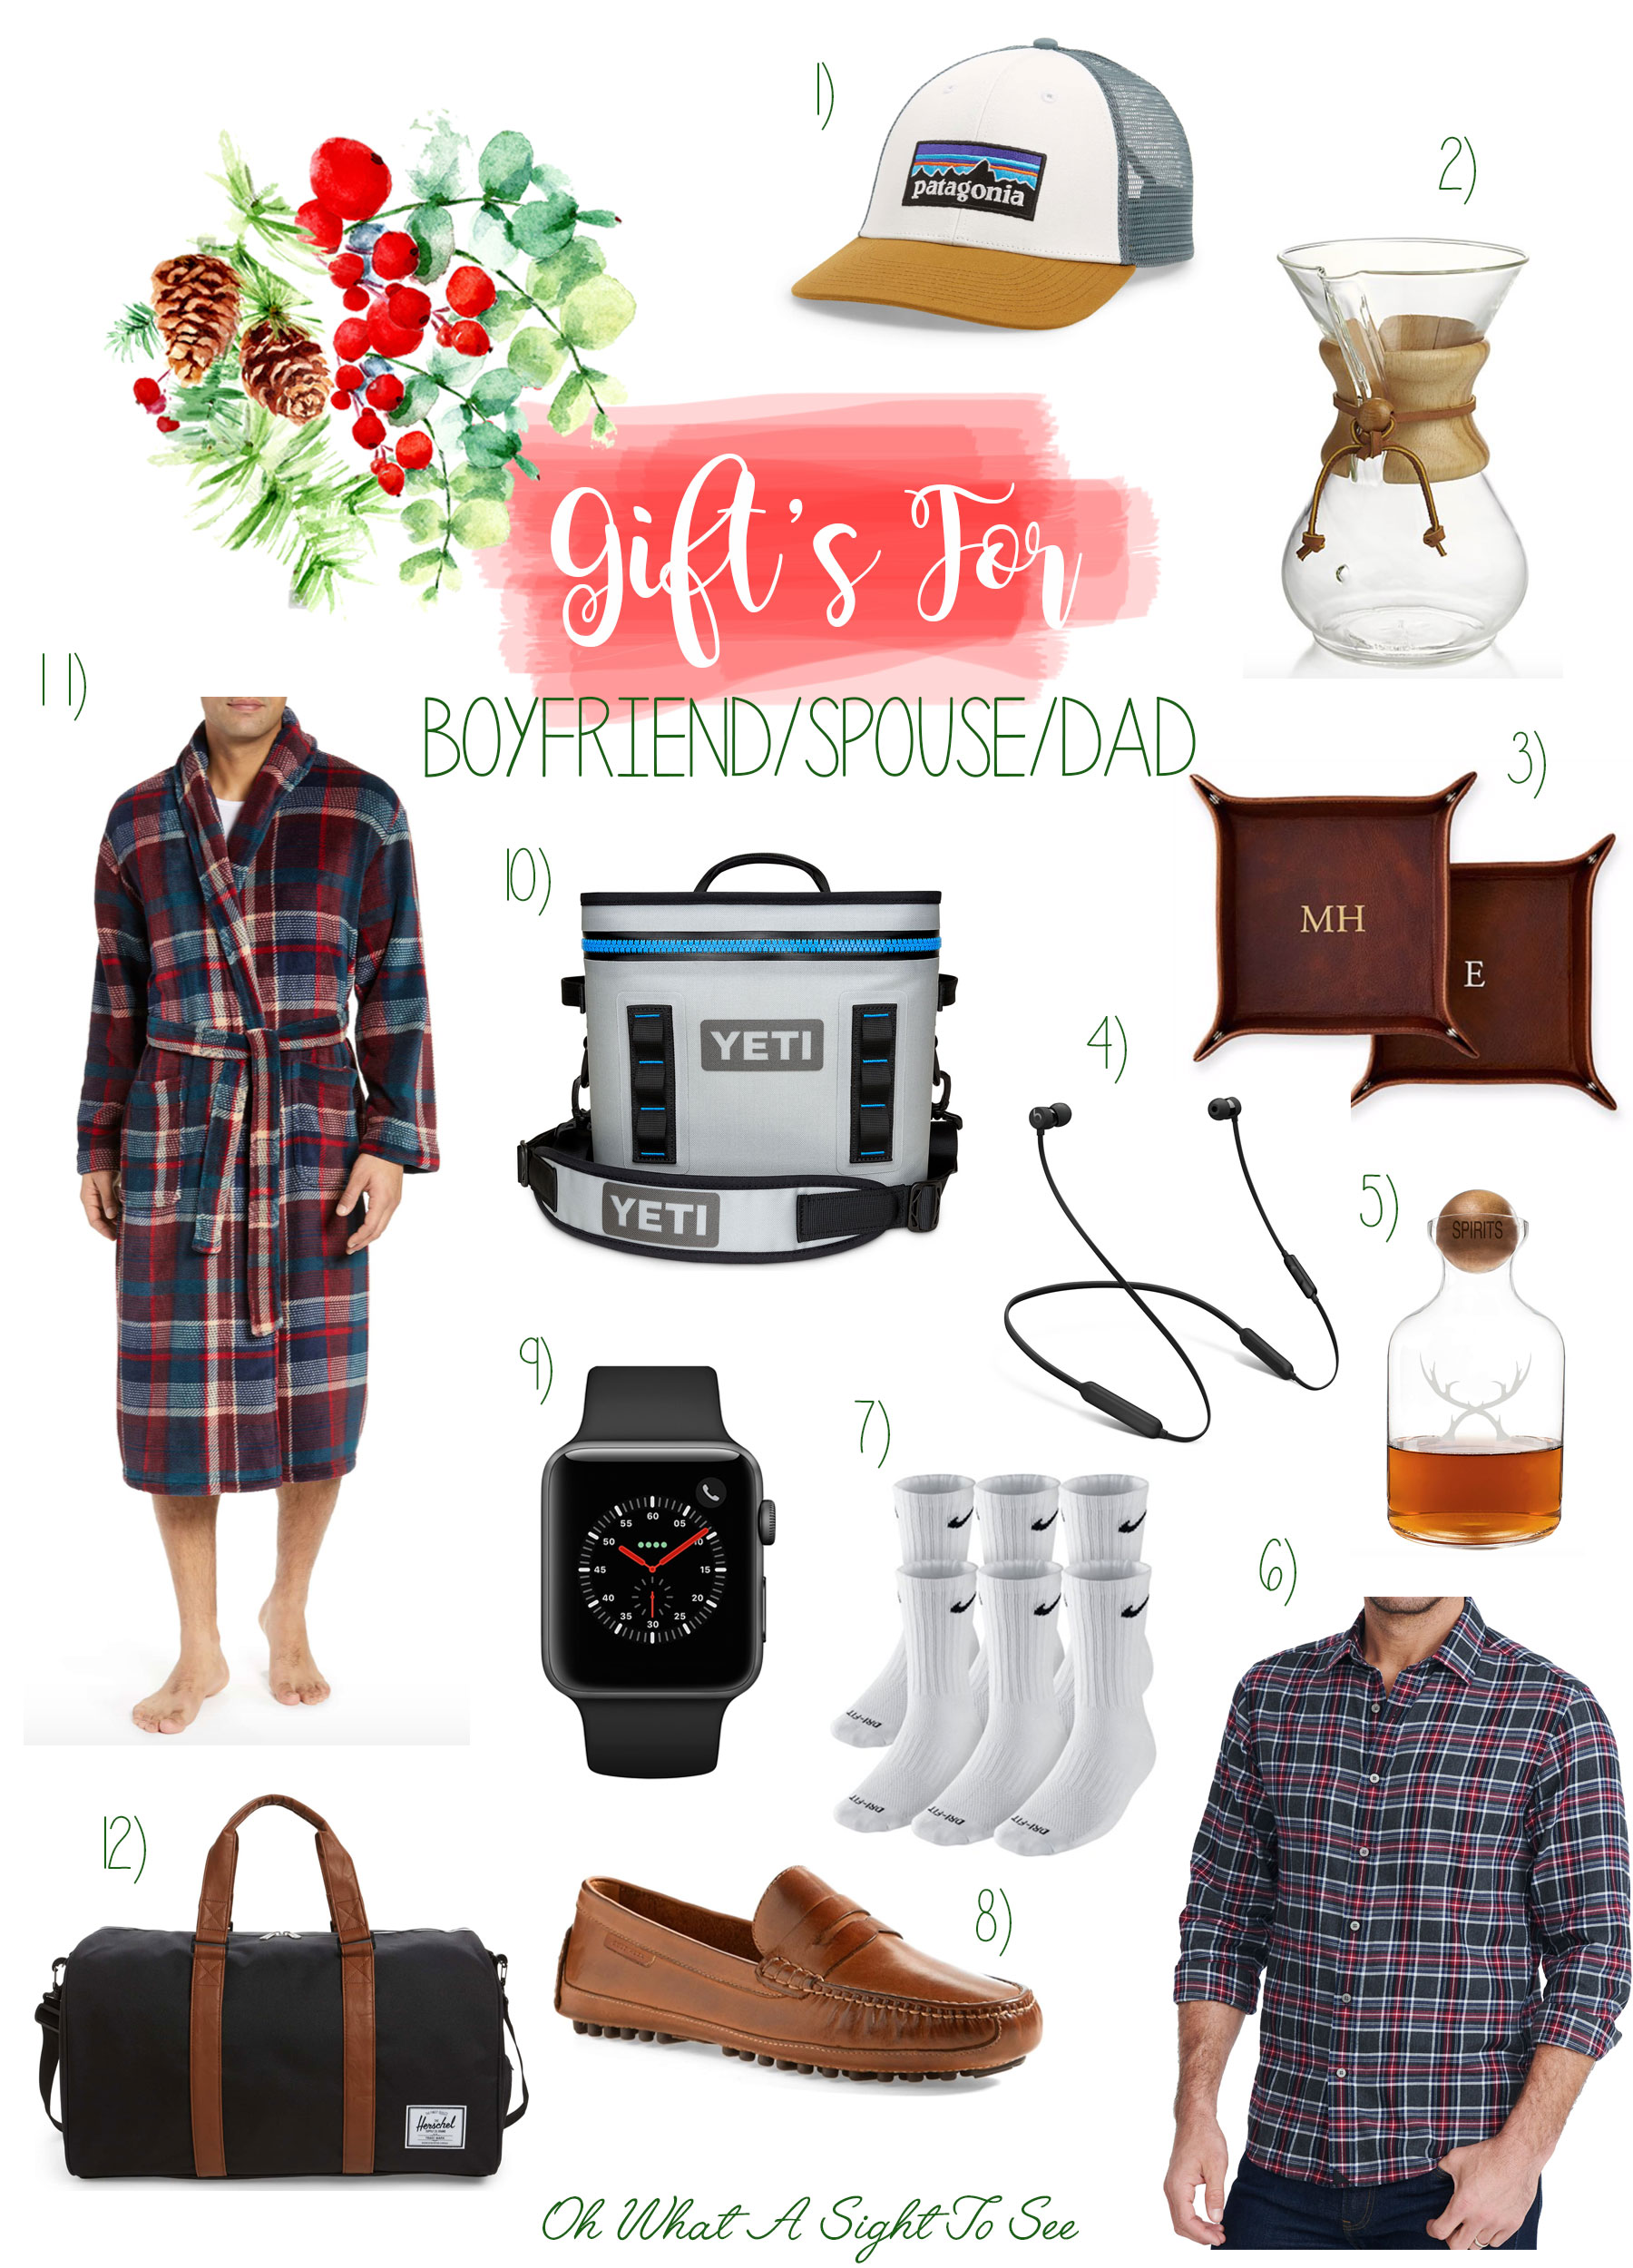 2018 Gift Guide For Your Boyfriend/Spouse/Dad - Oh What A Sight To See